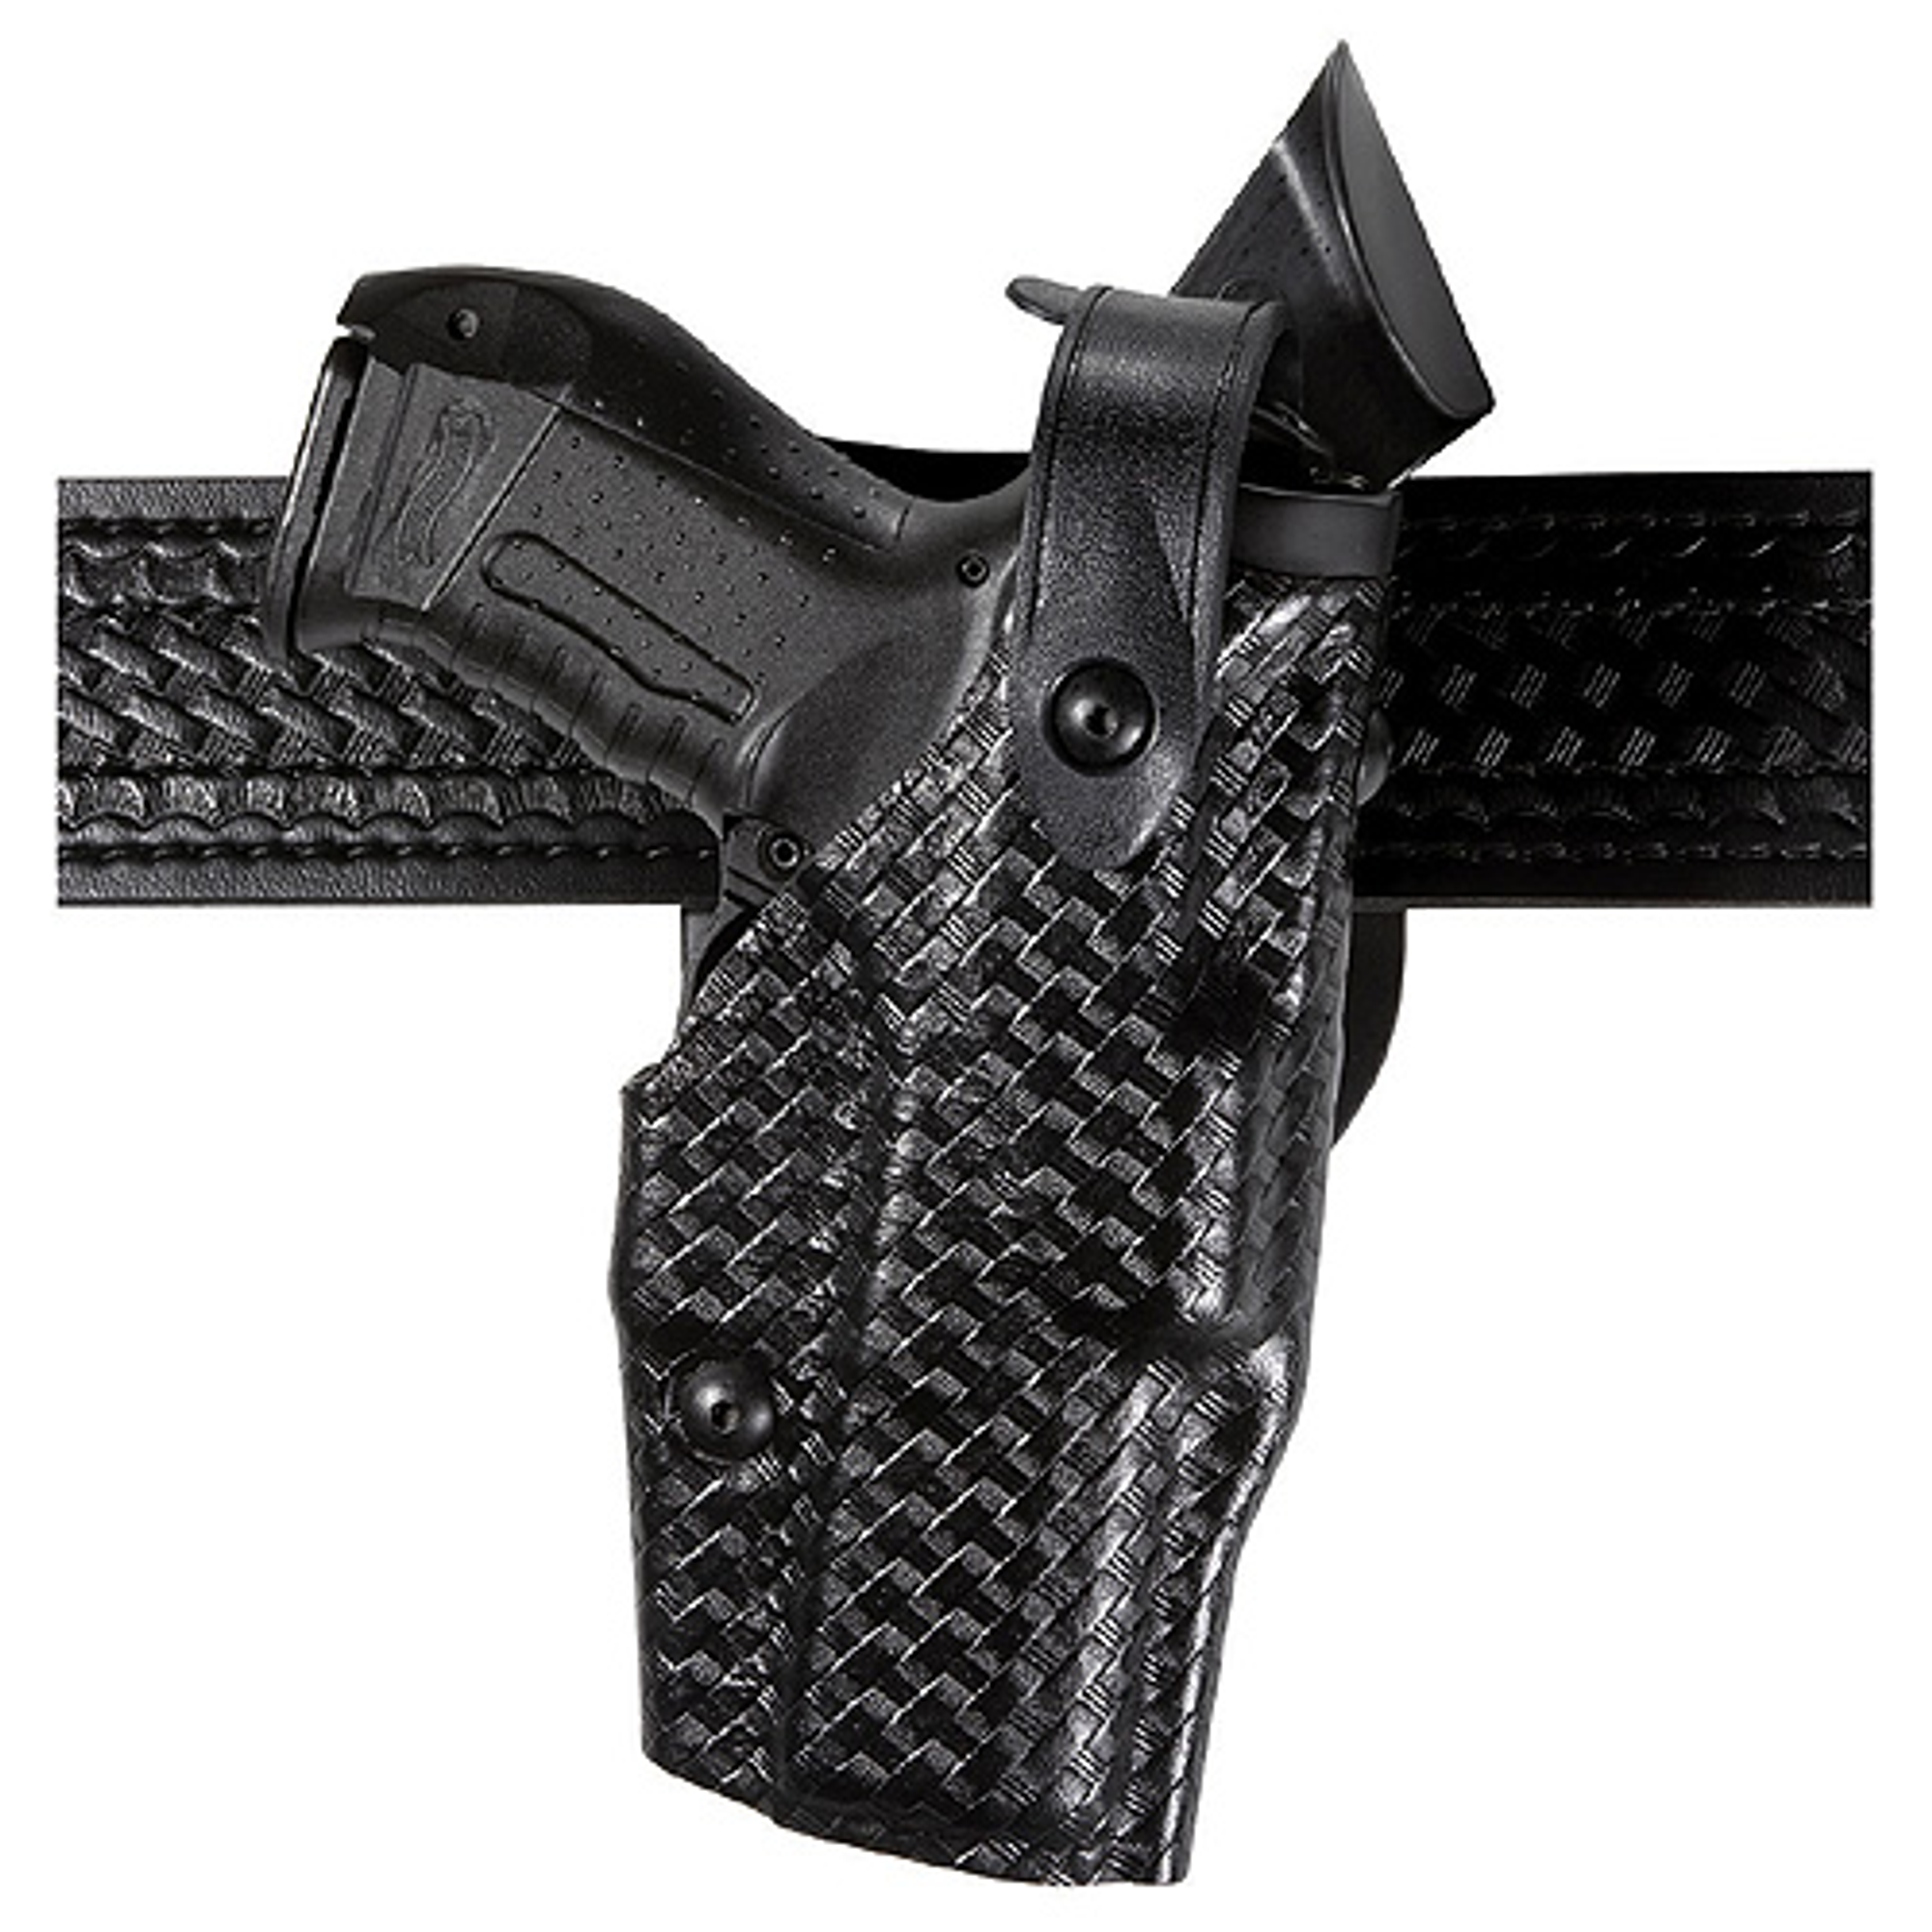 Model 6360 Als/sls Mid-ride, Level Iii Retention Duty Holster For Smith & Wesson M&p 9